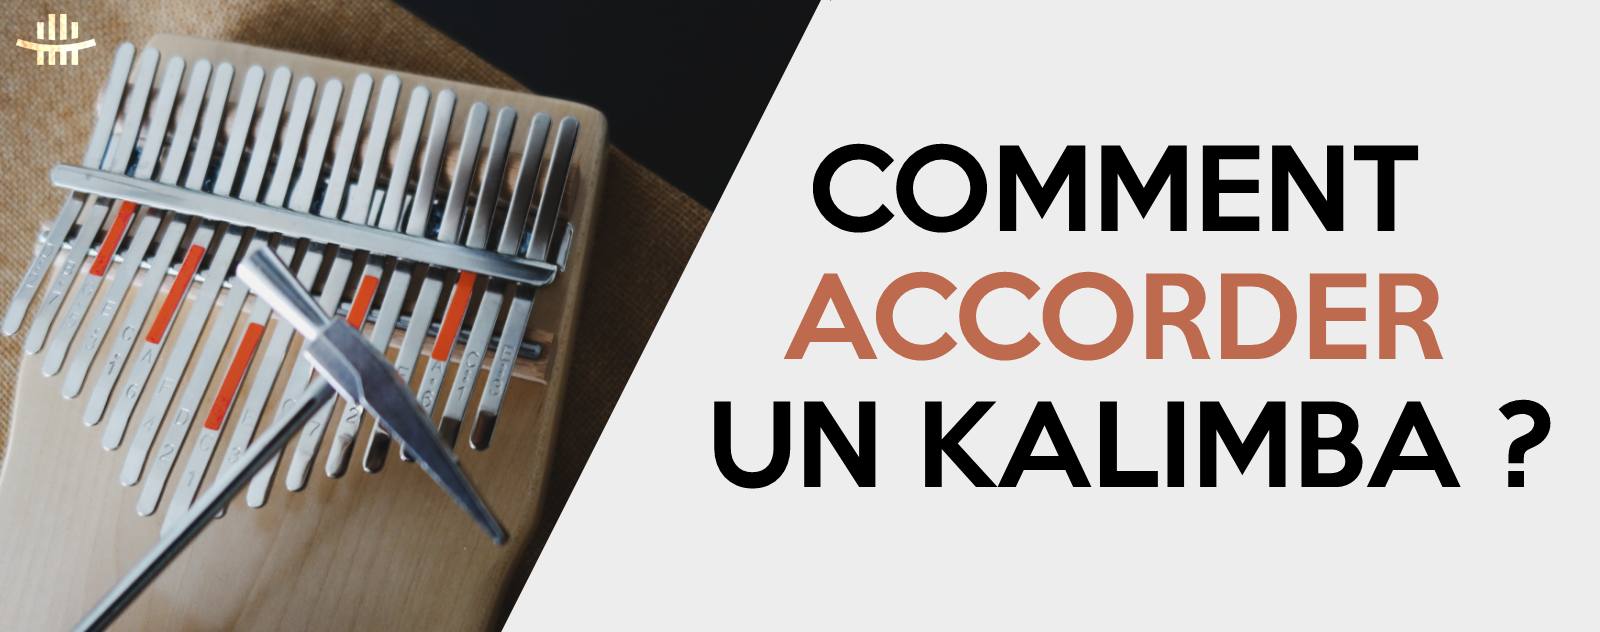 comment accorder un kalimba guide complet